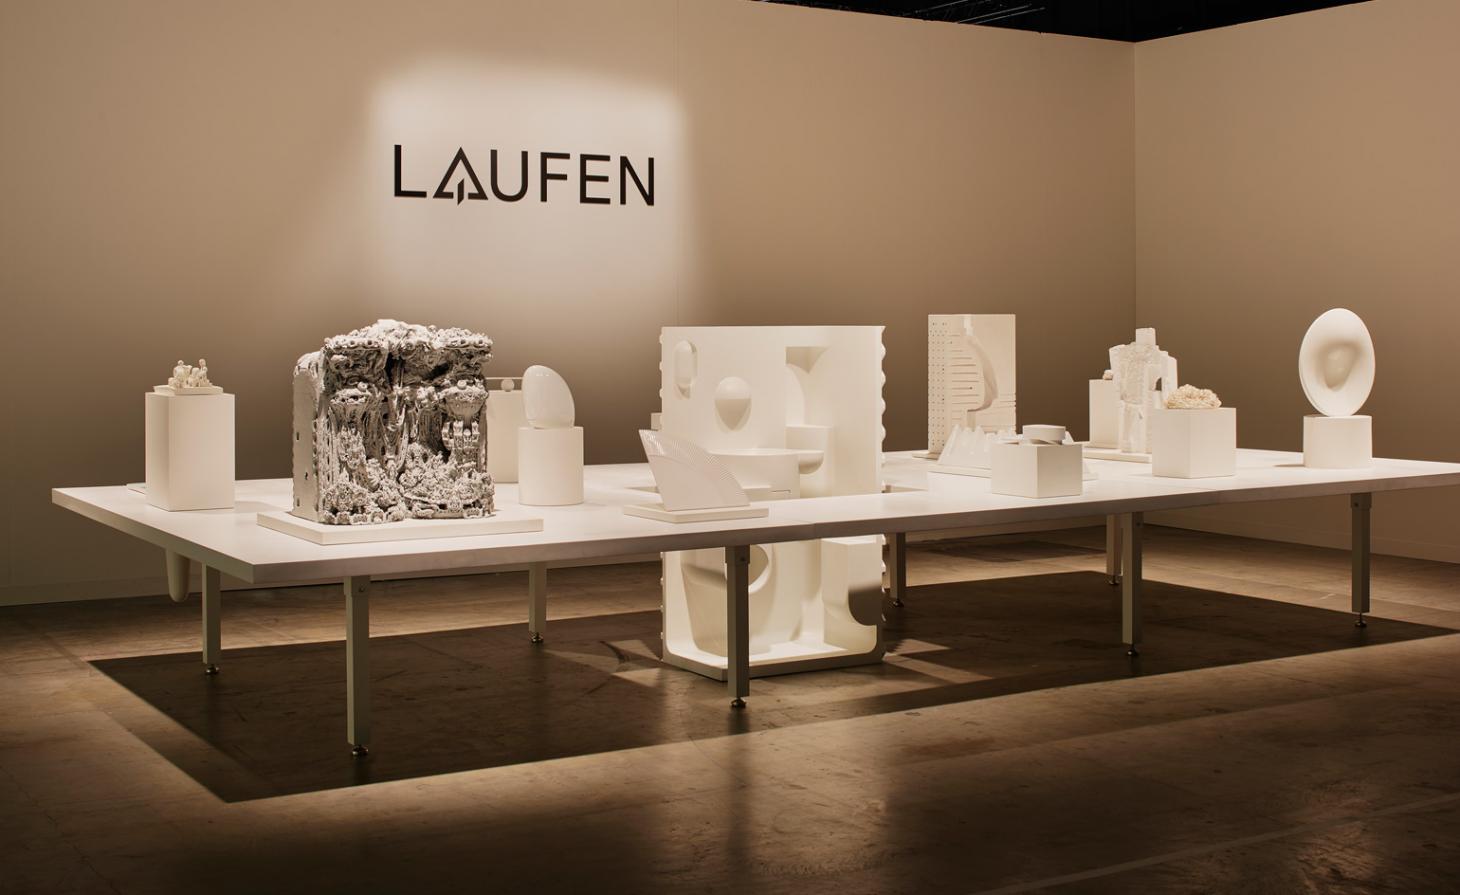 laufen a curated art show what design miami basel-1